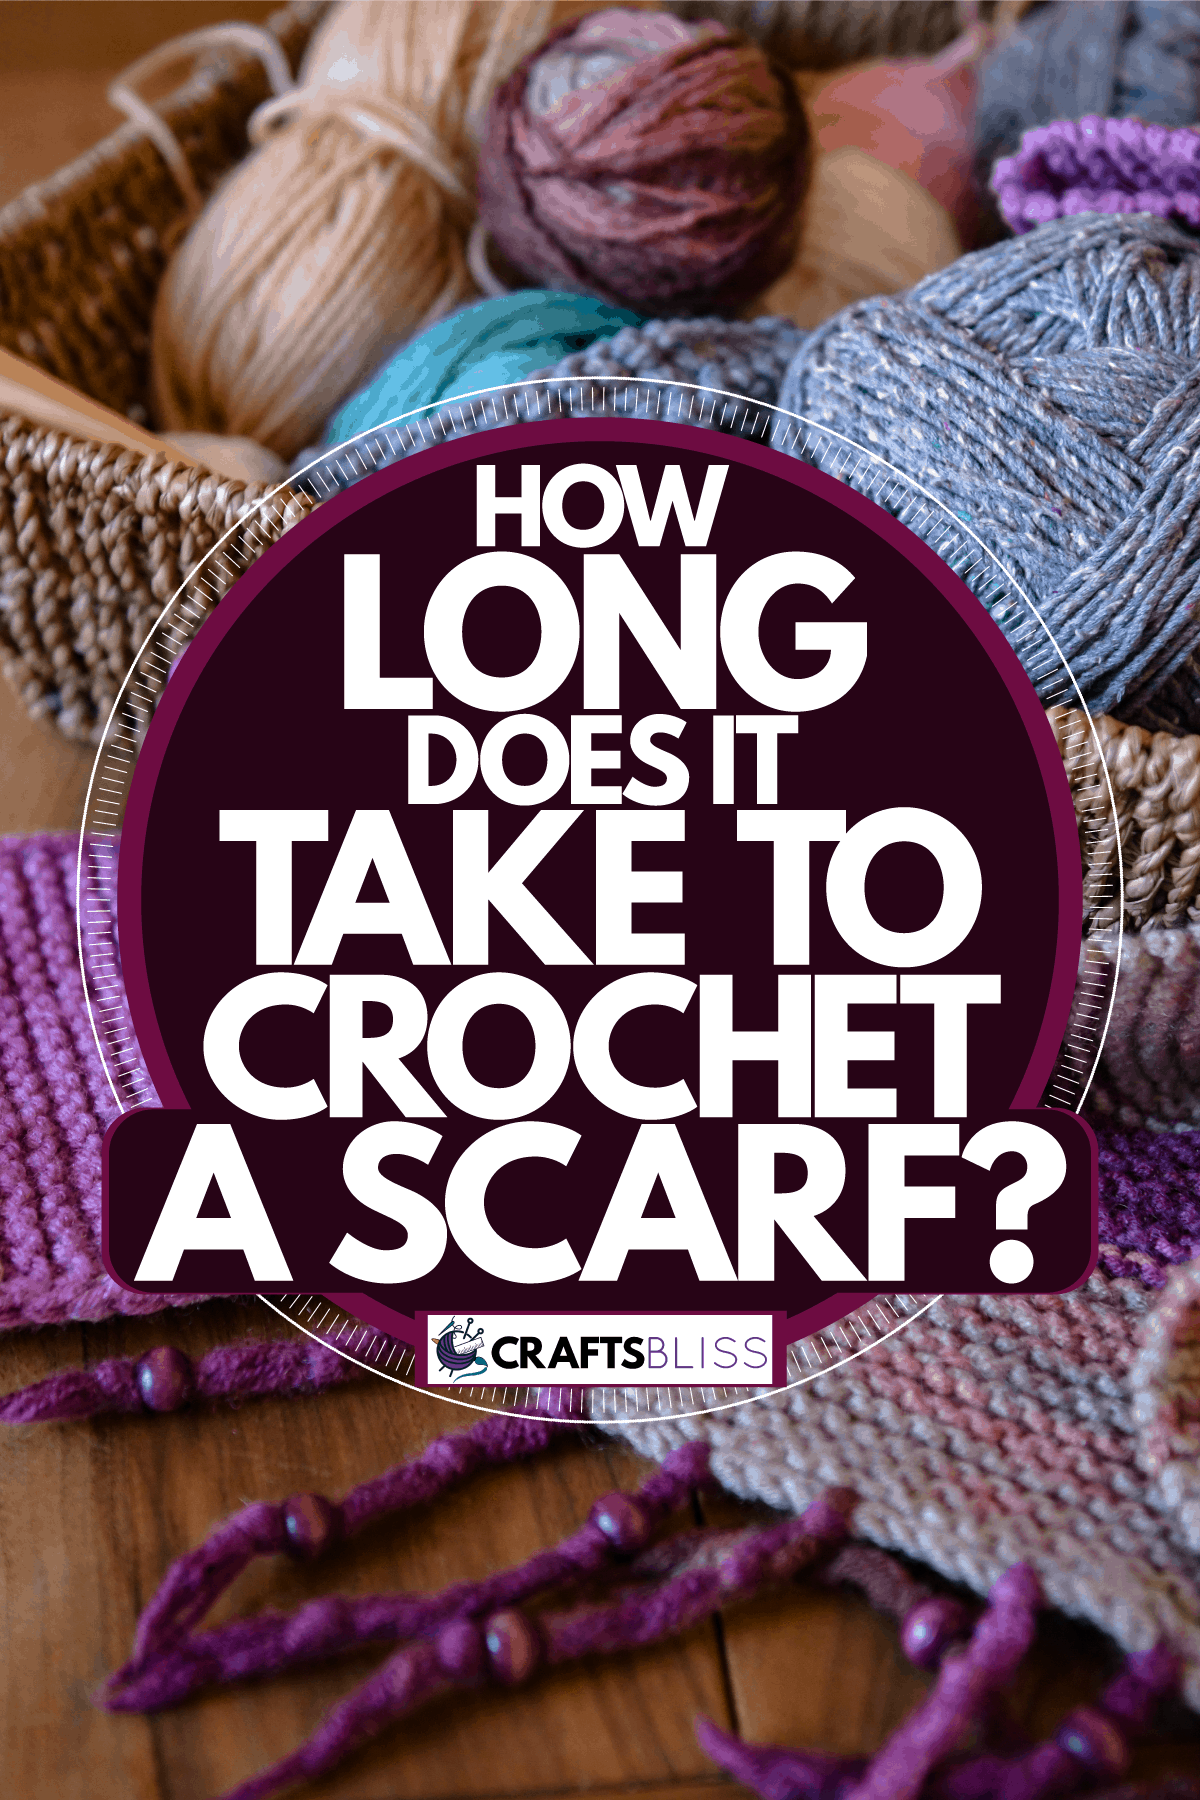 Crocheting materials in a basket with perfectly crocheted scarf on the side, How Long Does It Take To Crochet A Scarf?